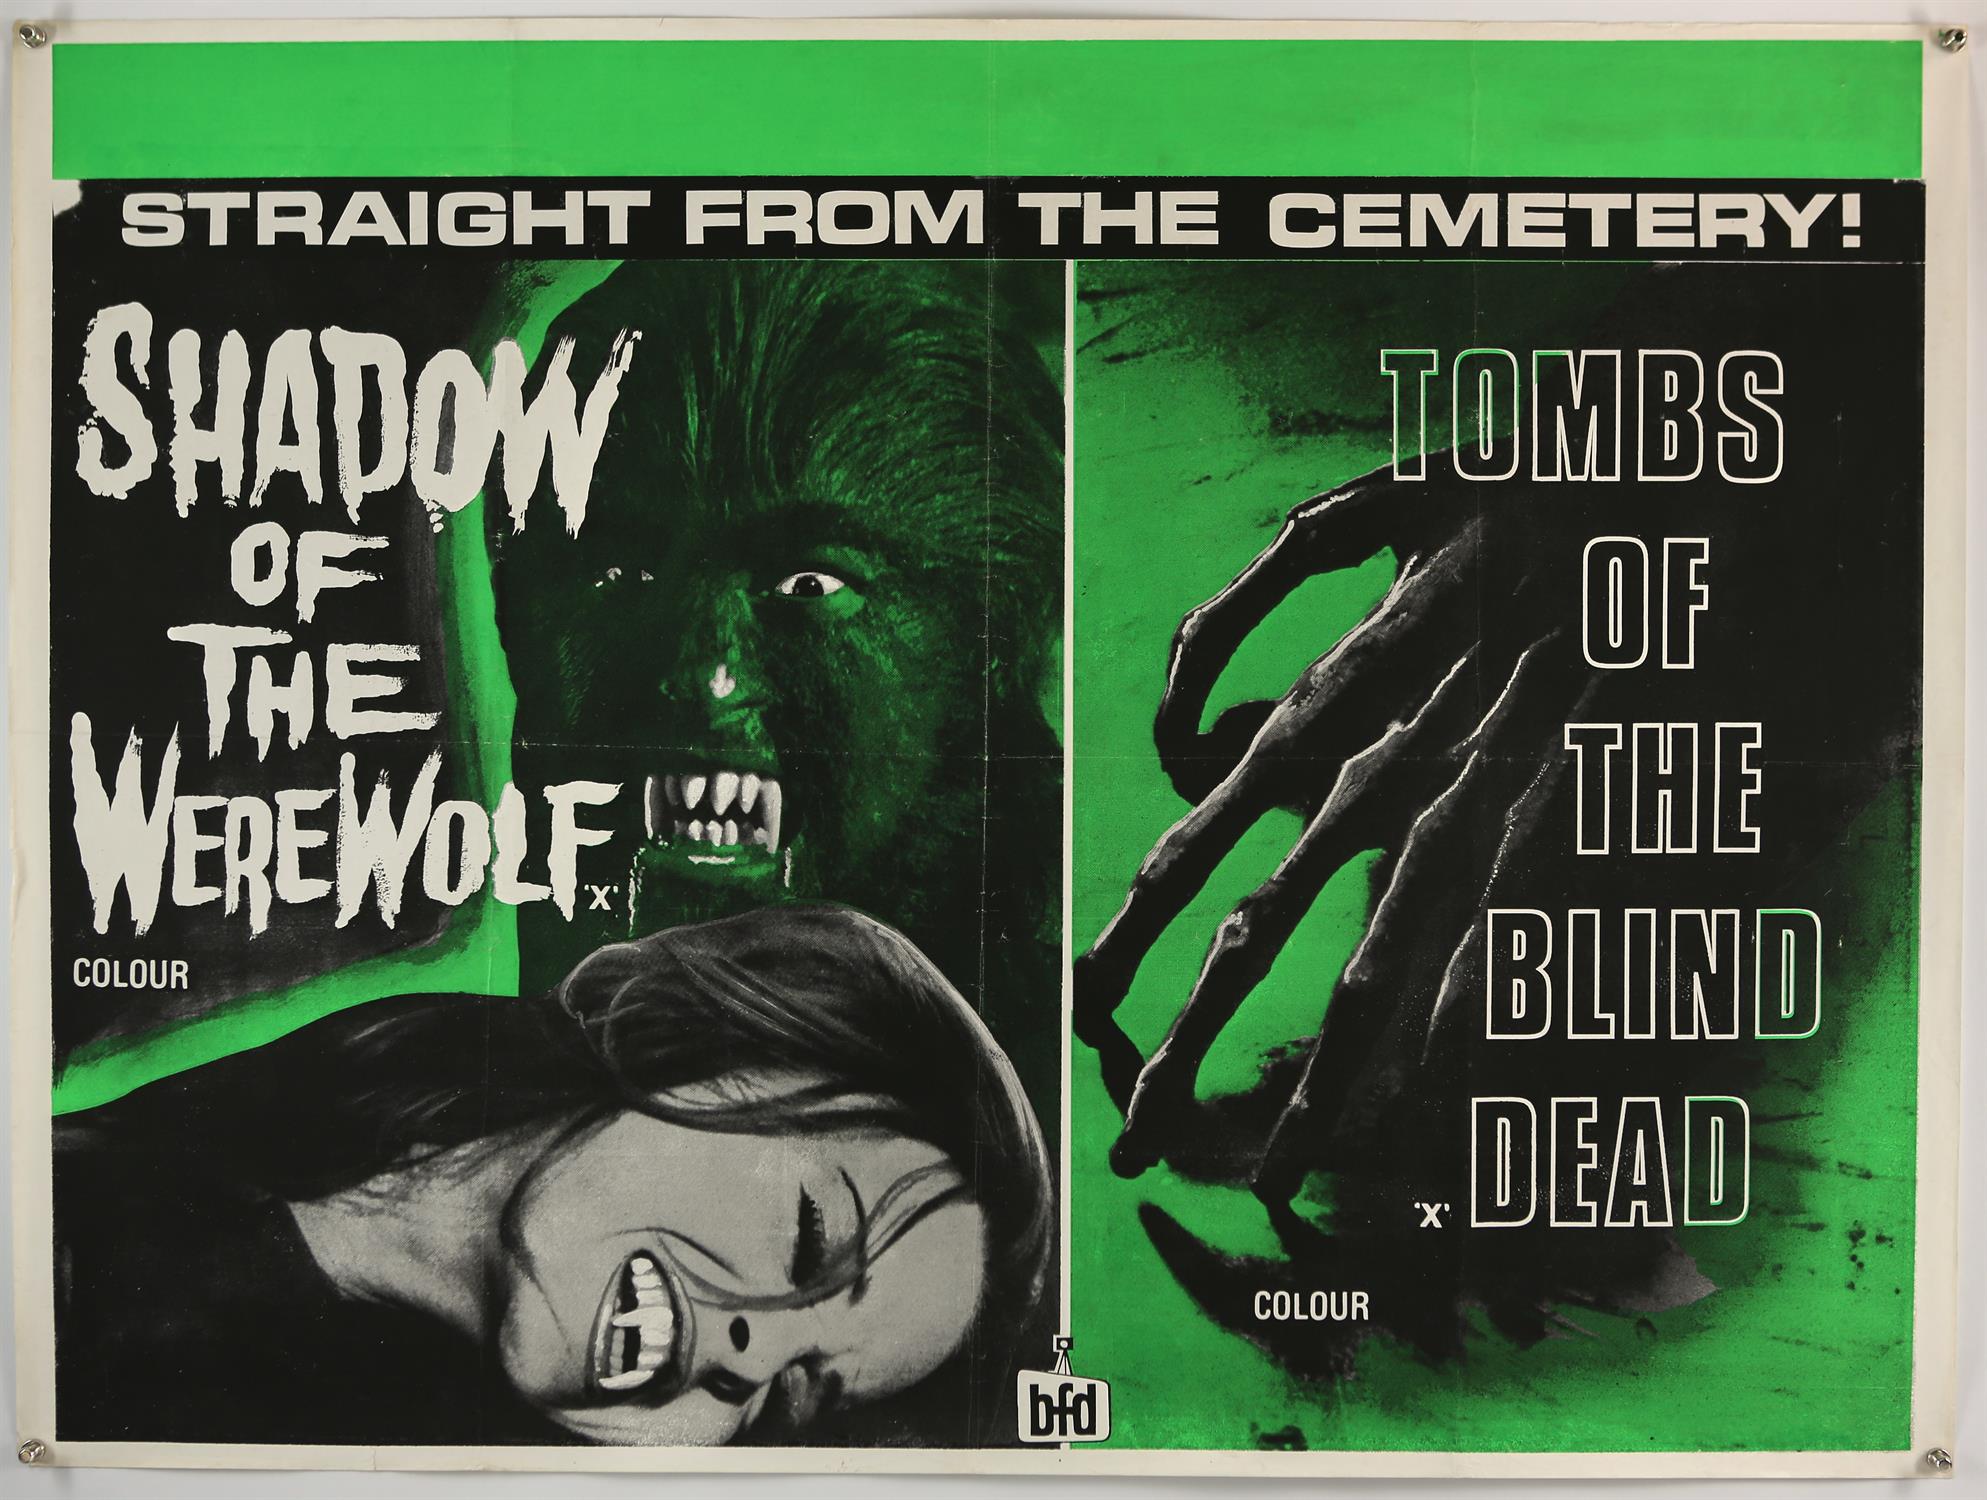 Shadow of the Werewolf (AKA The Werewolf Versus The Vampire Woman) / Tombs of the Blind Dead (1971